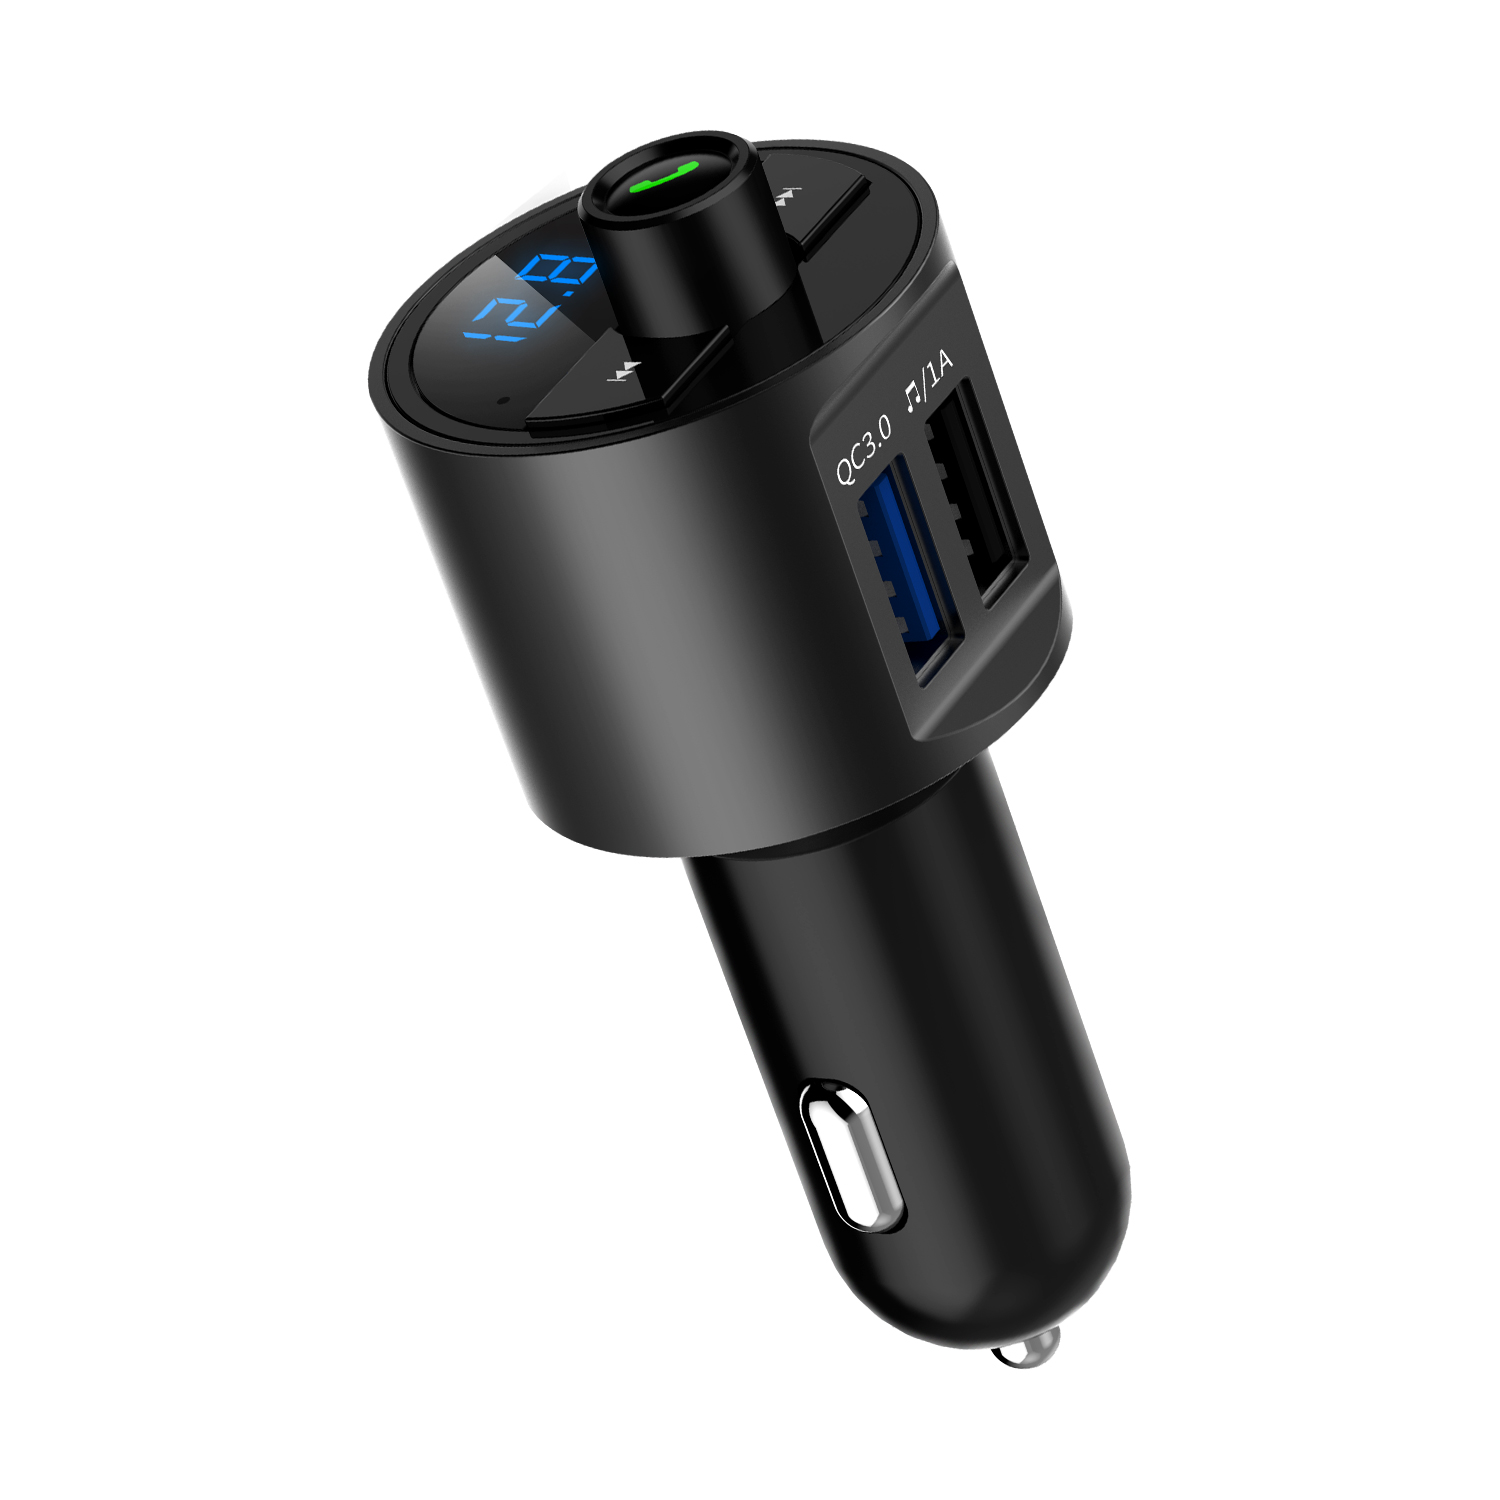 Mini LED Display Dual USB Bluetooth Hands-Free Smart Quick Wireless 3.6A Car Charger with Microphone